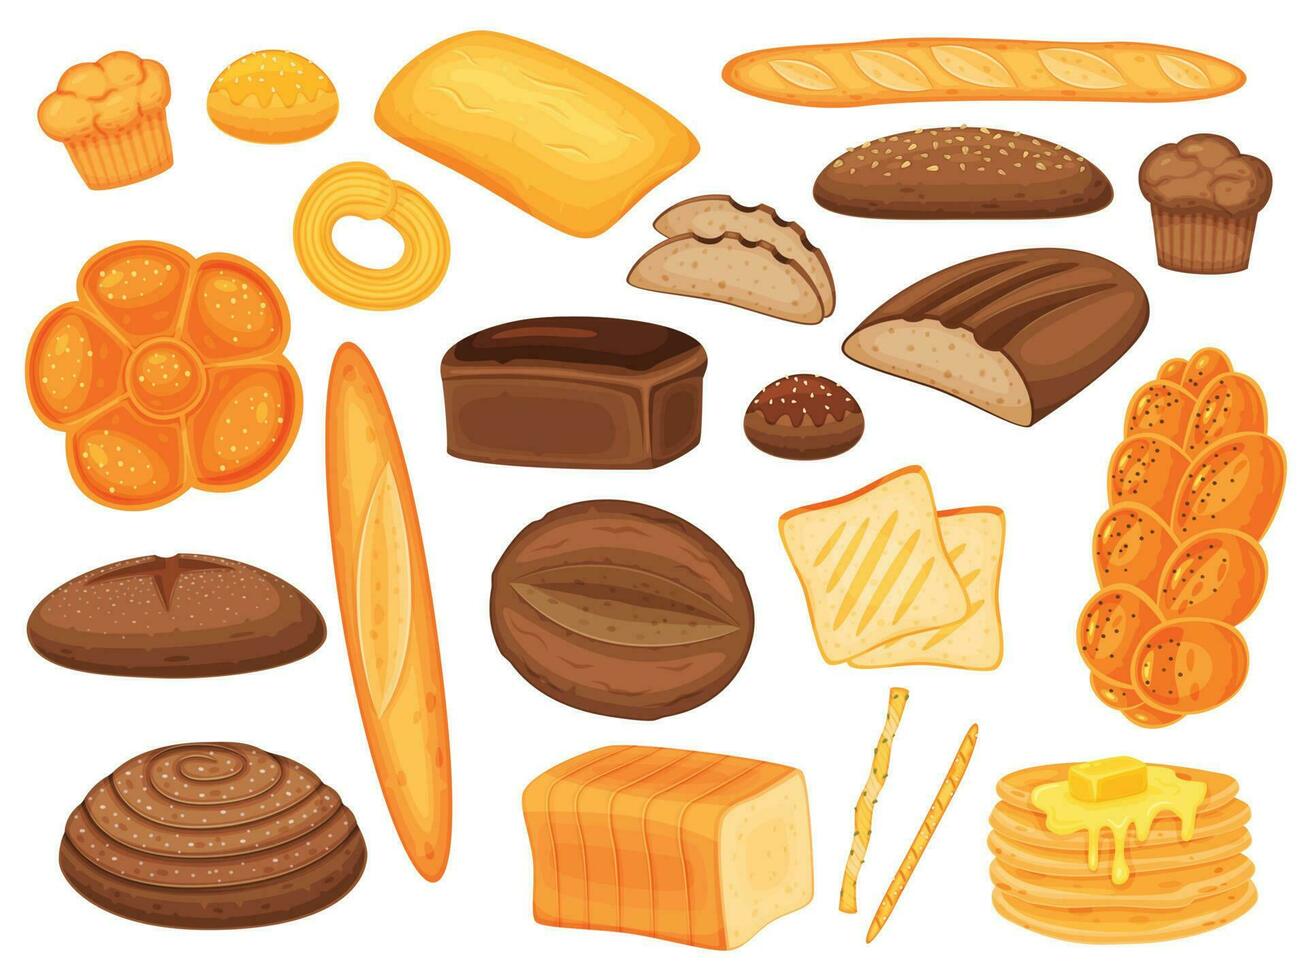 Cartoon bakery products, bread loaf, buns and pastry. Baguette, muffins, pancakes, whole wheat bread, homemade delicious pastries vector set